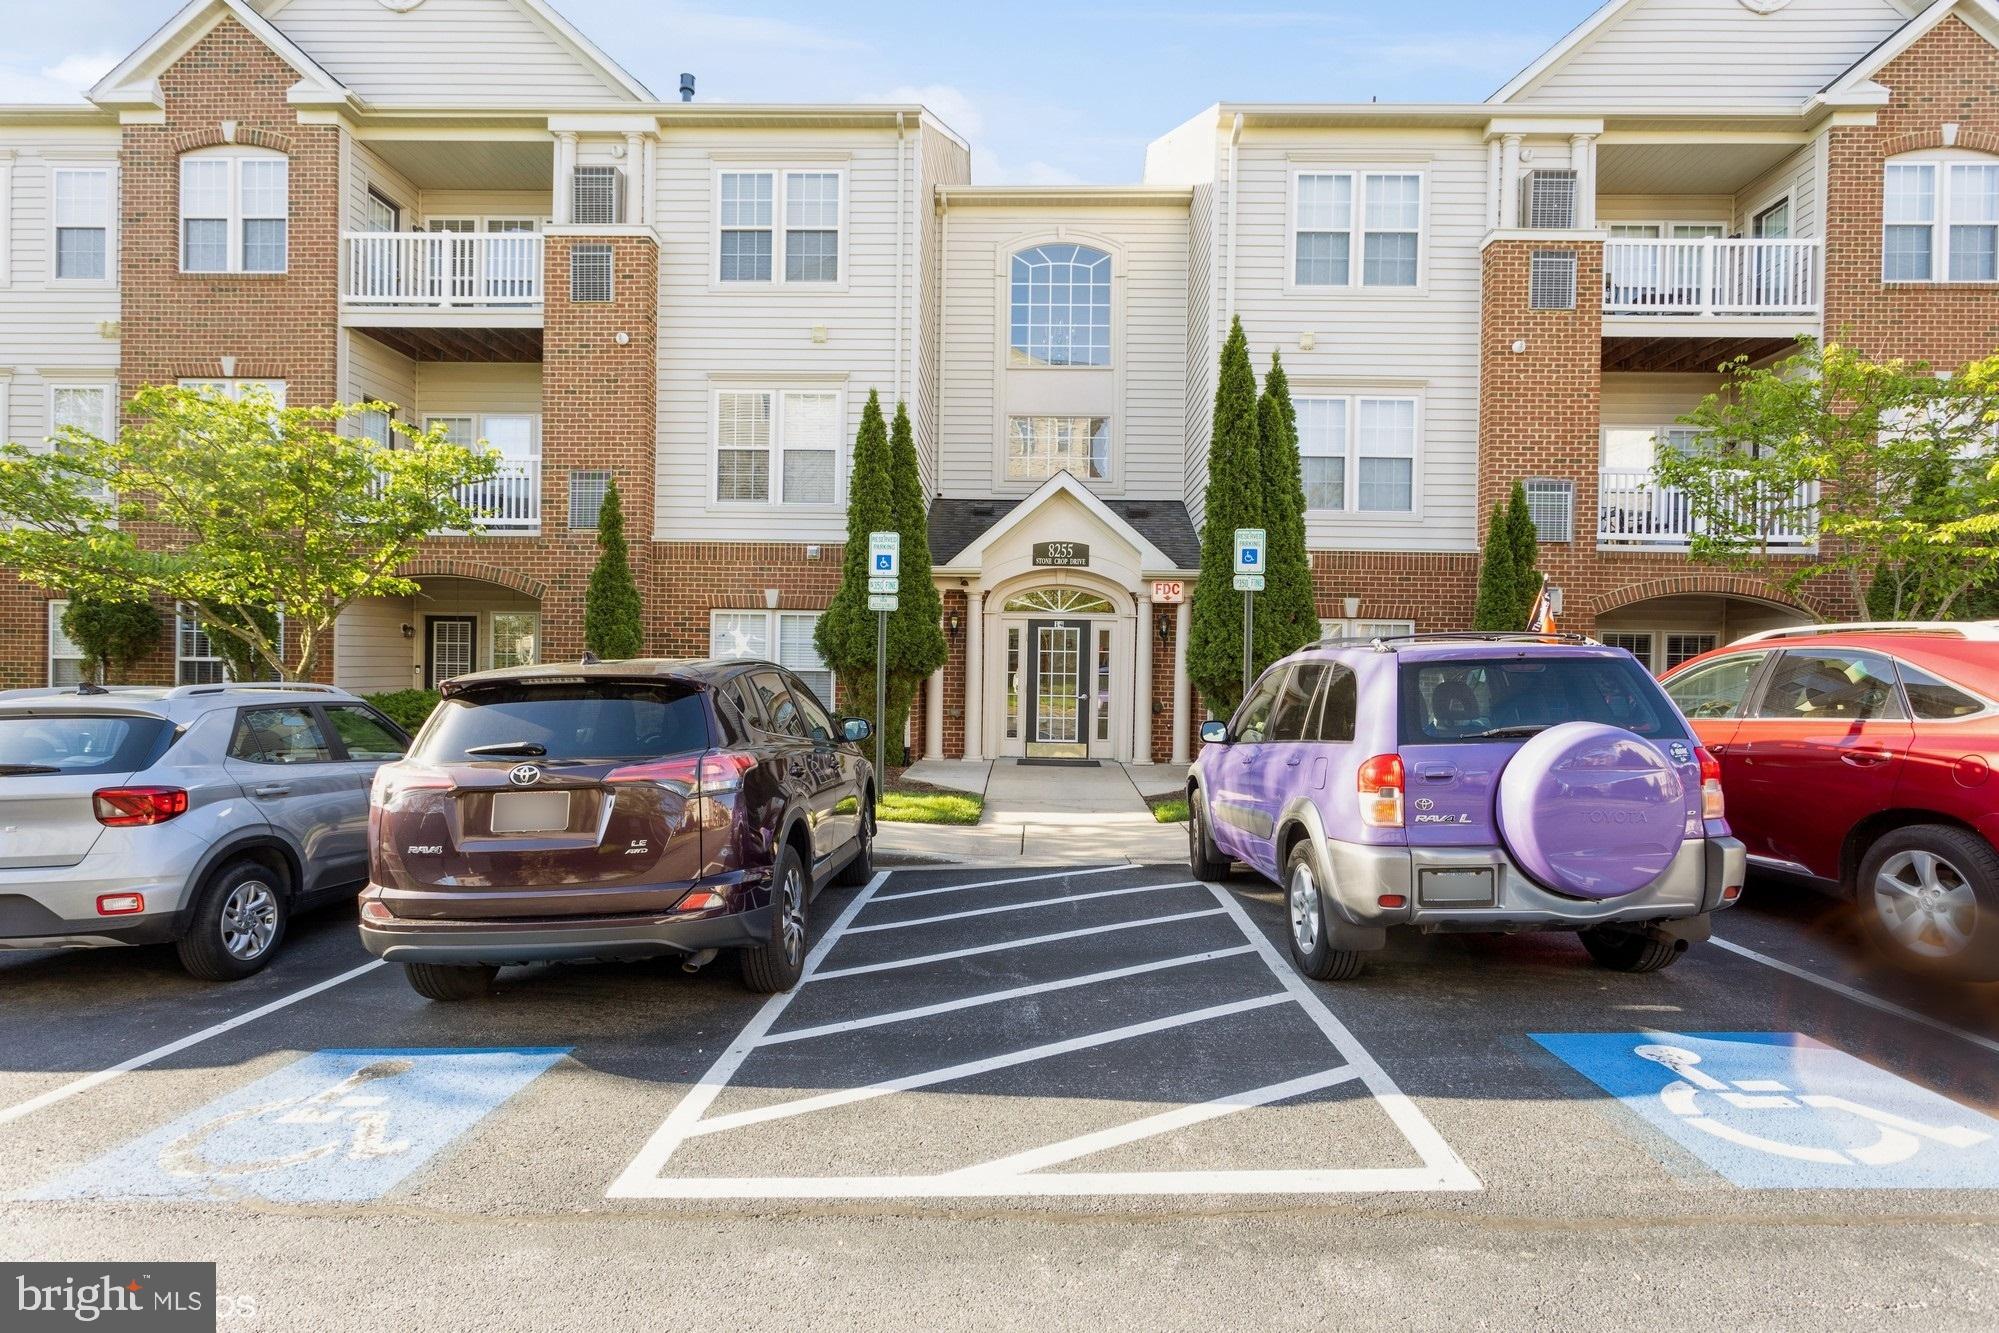 a front view of a residential apartment building with cars parked